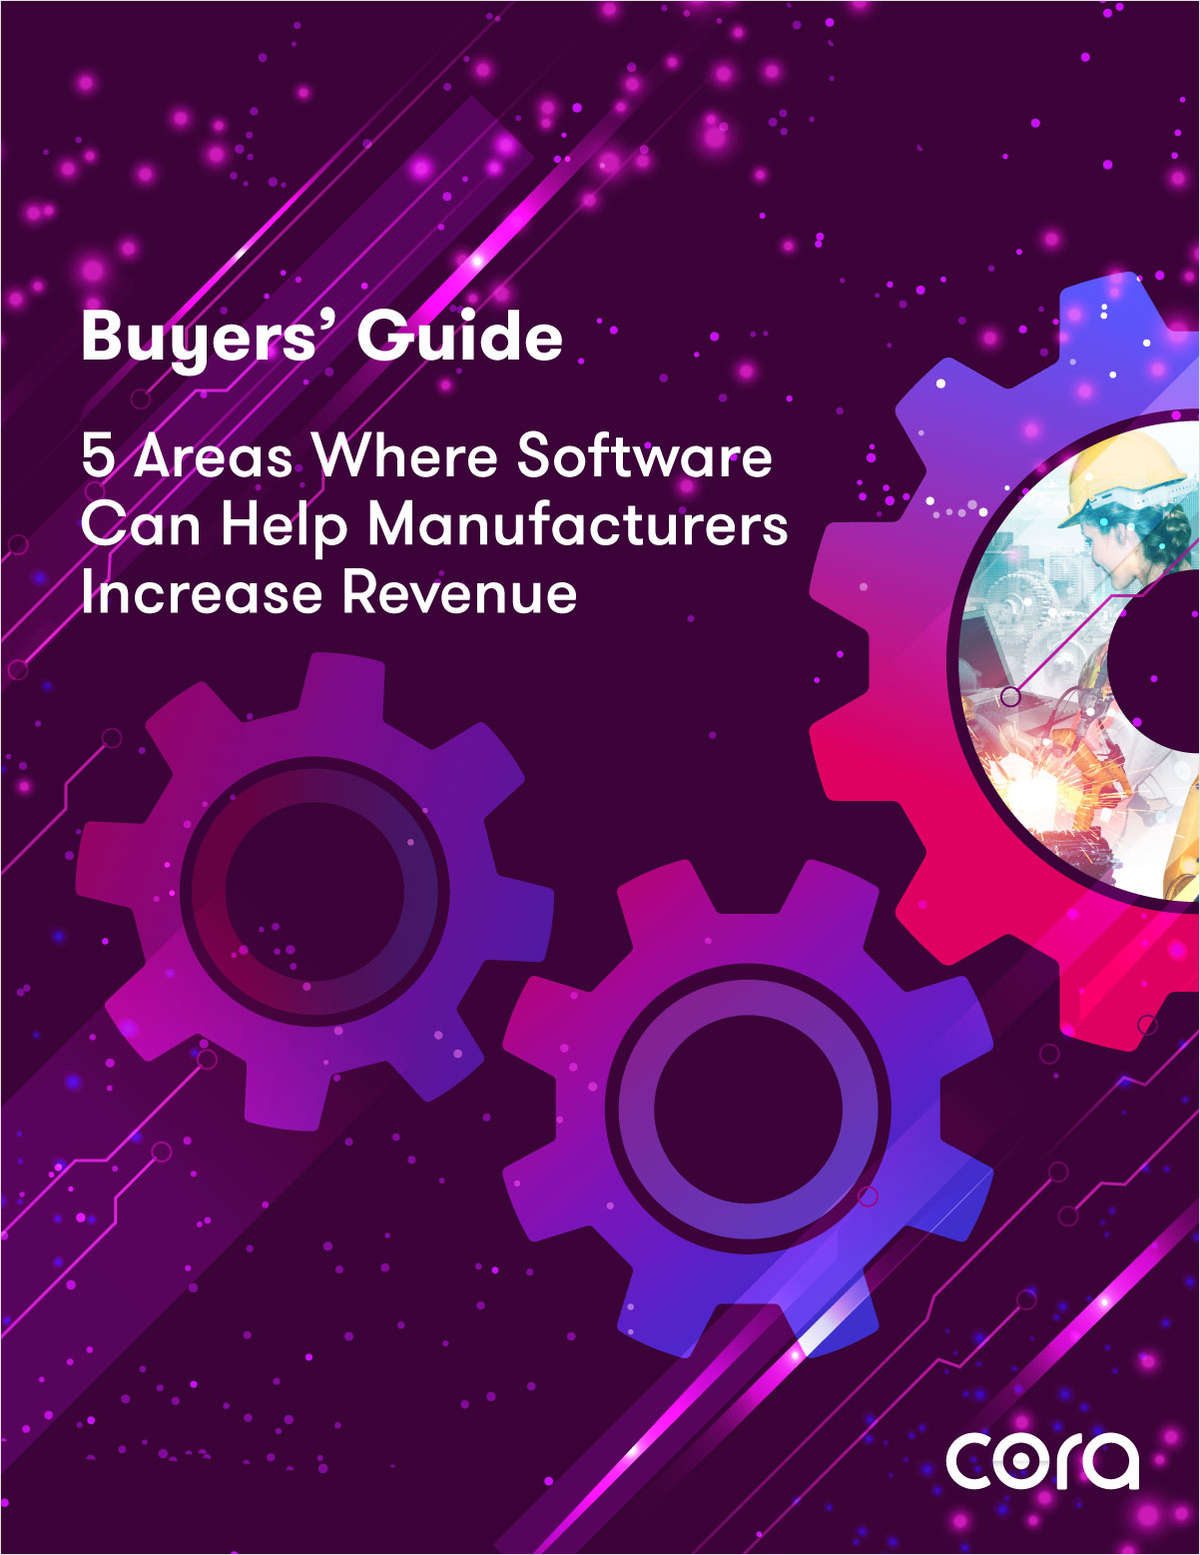 Buyers' Guide: 5 Areas Where Software Can Help Manufacturers Increase Revenue